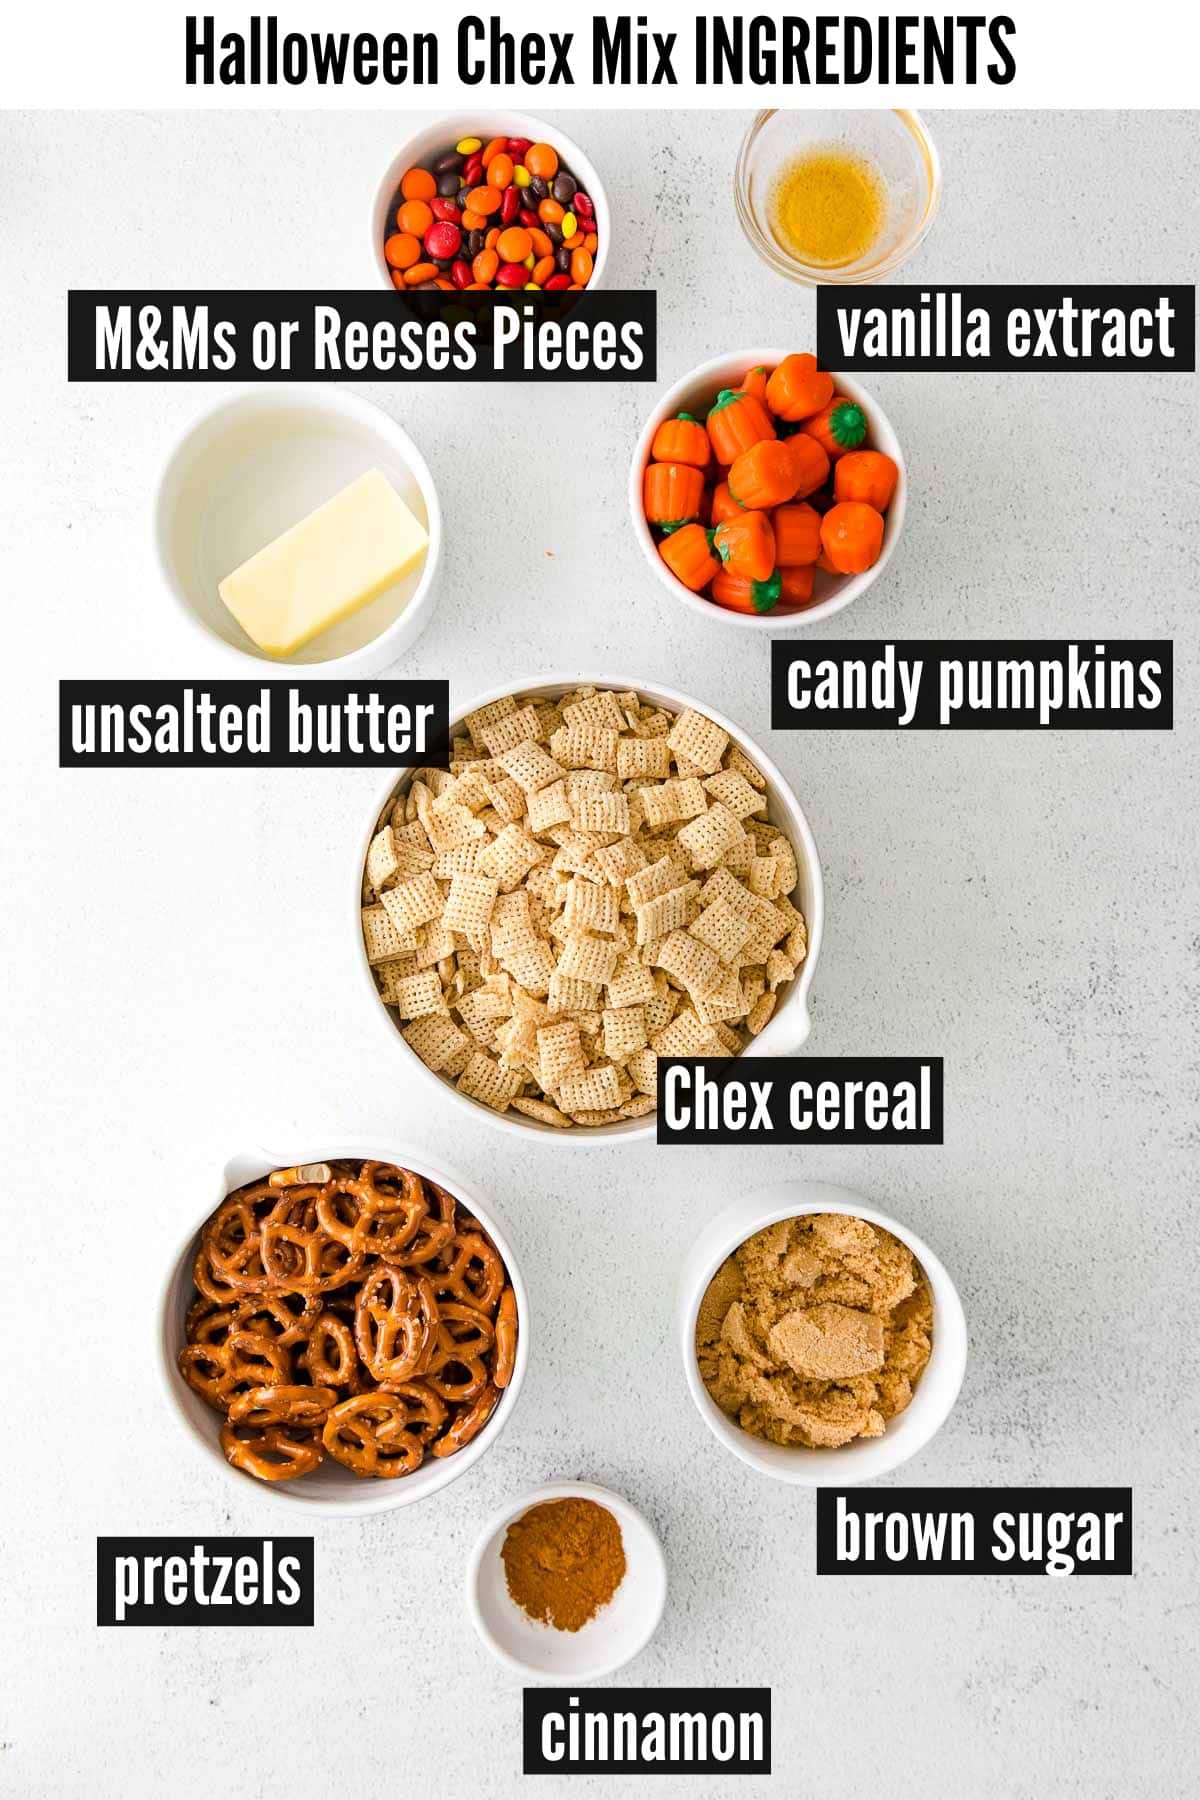 halloween chex mix labelled ingredients.